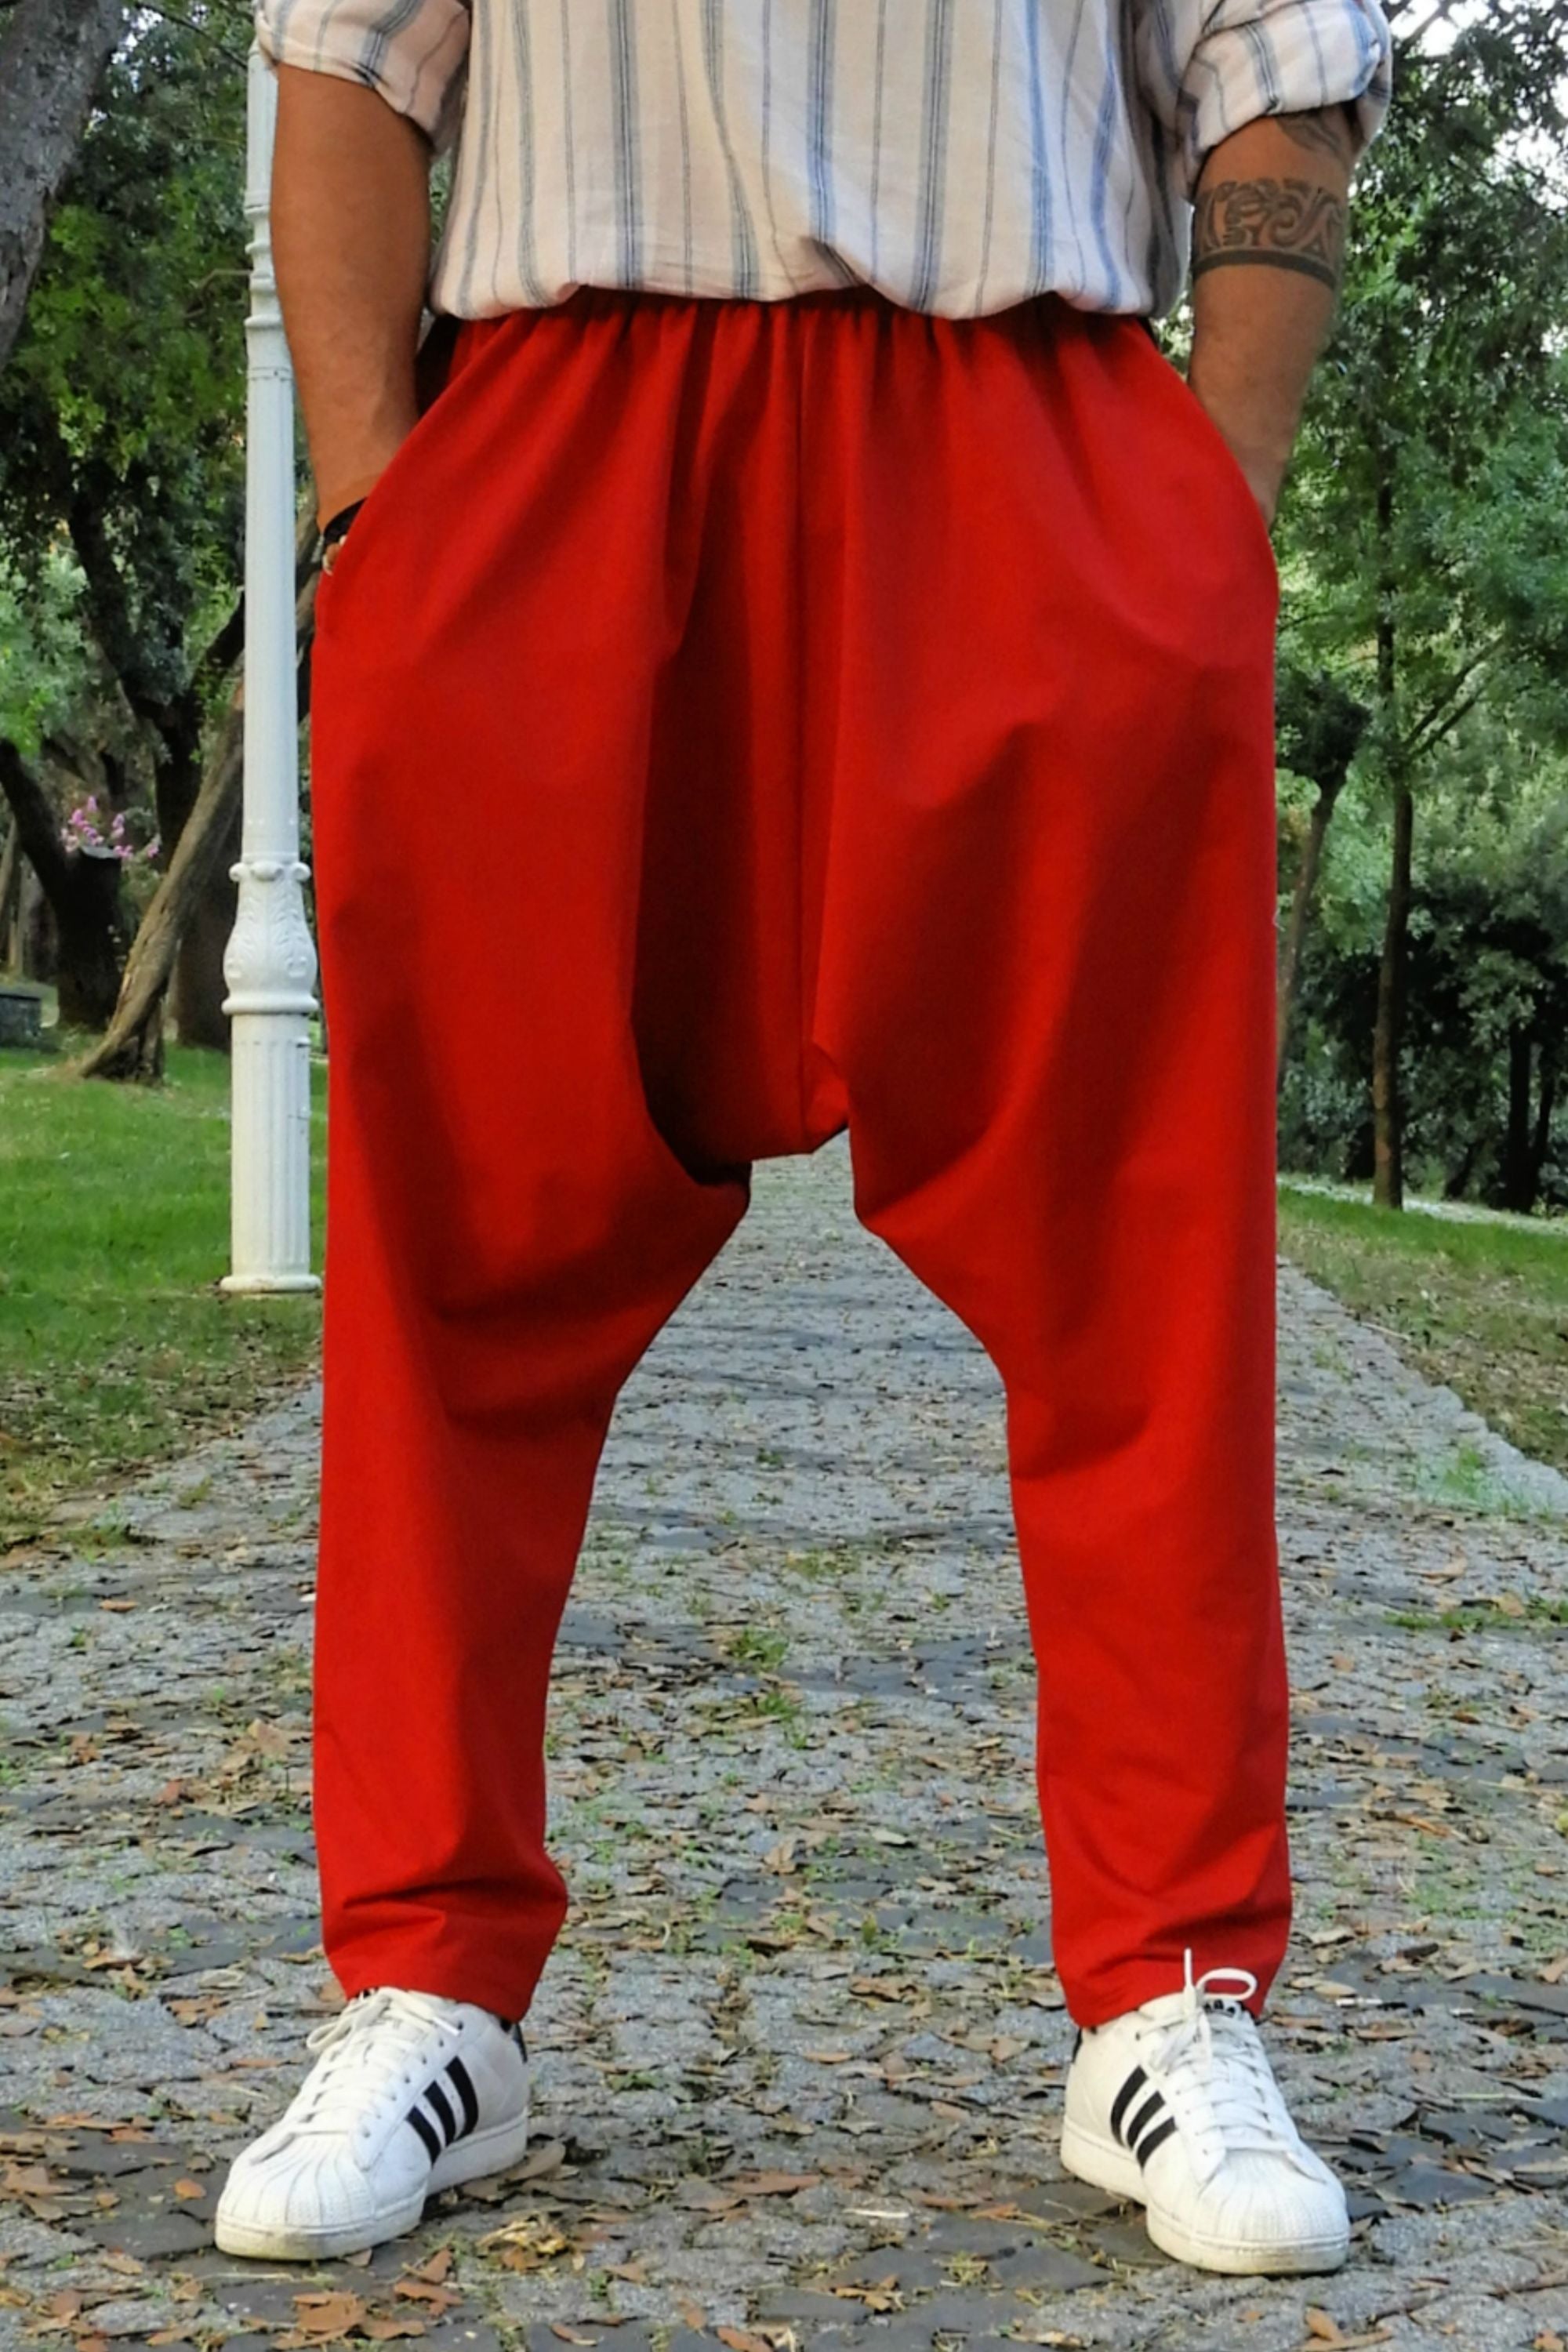 Odana's | SNOW Men's Harem Pants For Winter (Gray, Red) Red | Harem Pants | Sustainable Fashion